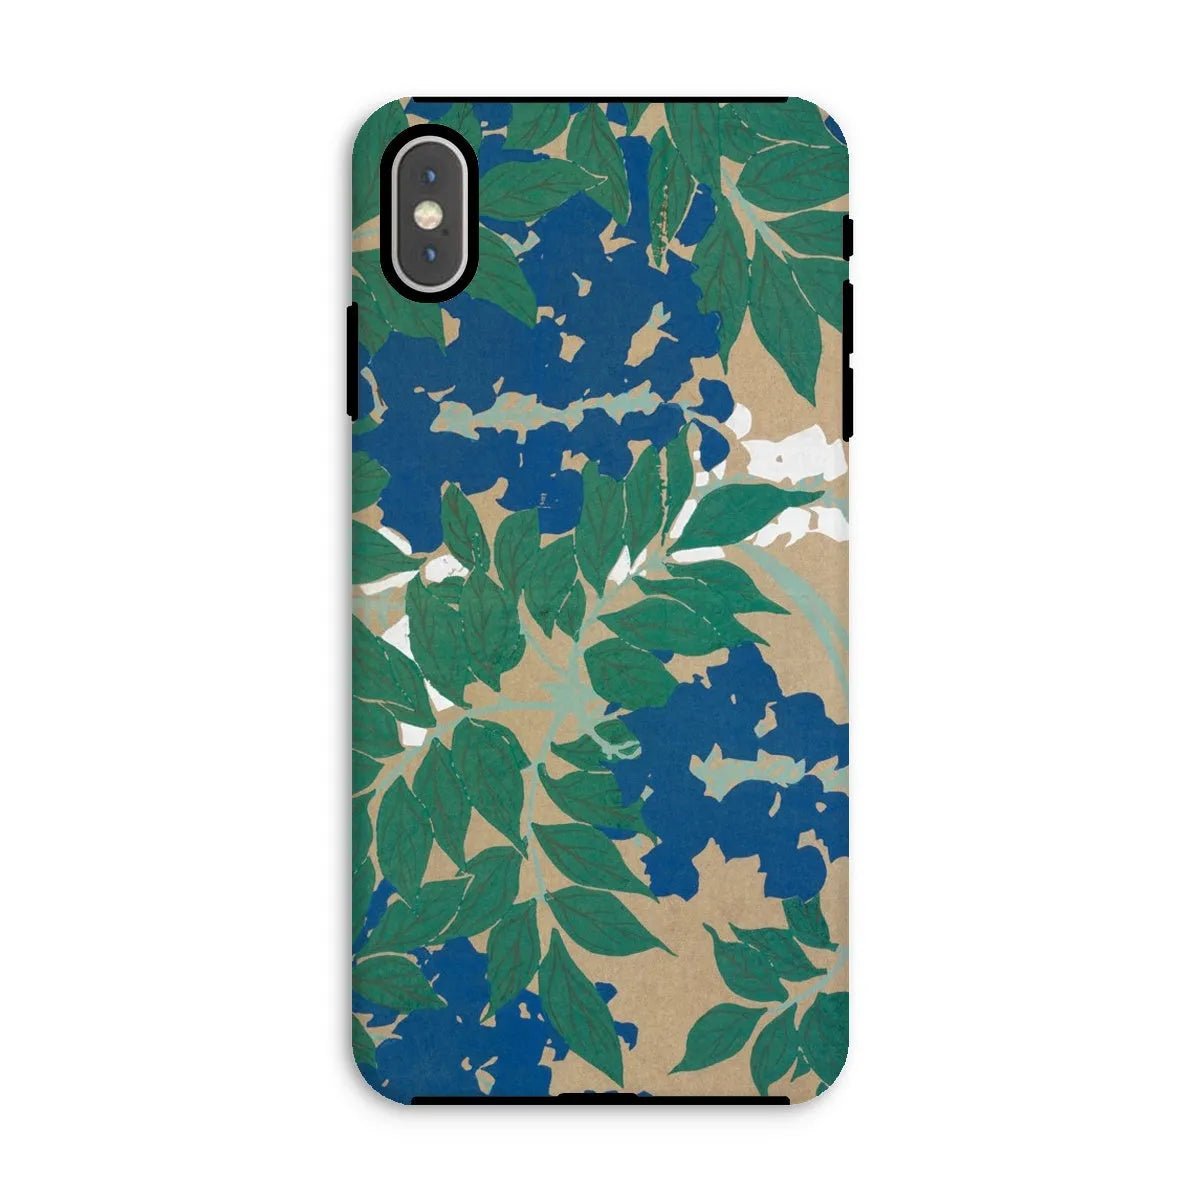 Wisteria From Momoyogusa - Floral Phone Case - Kamisaka Sekka - Iphone Xs Max / Matte - Mobile Phone Cases - Aesthetic